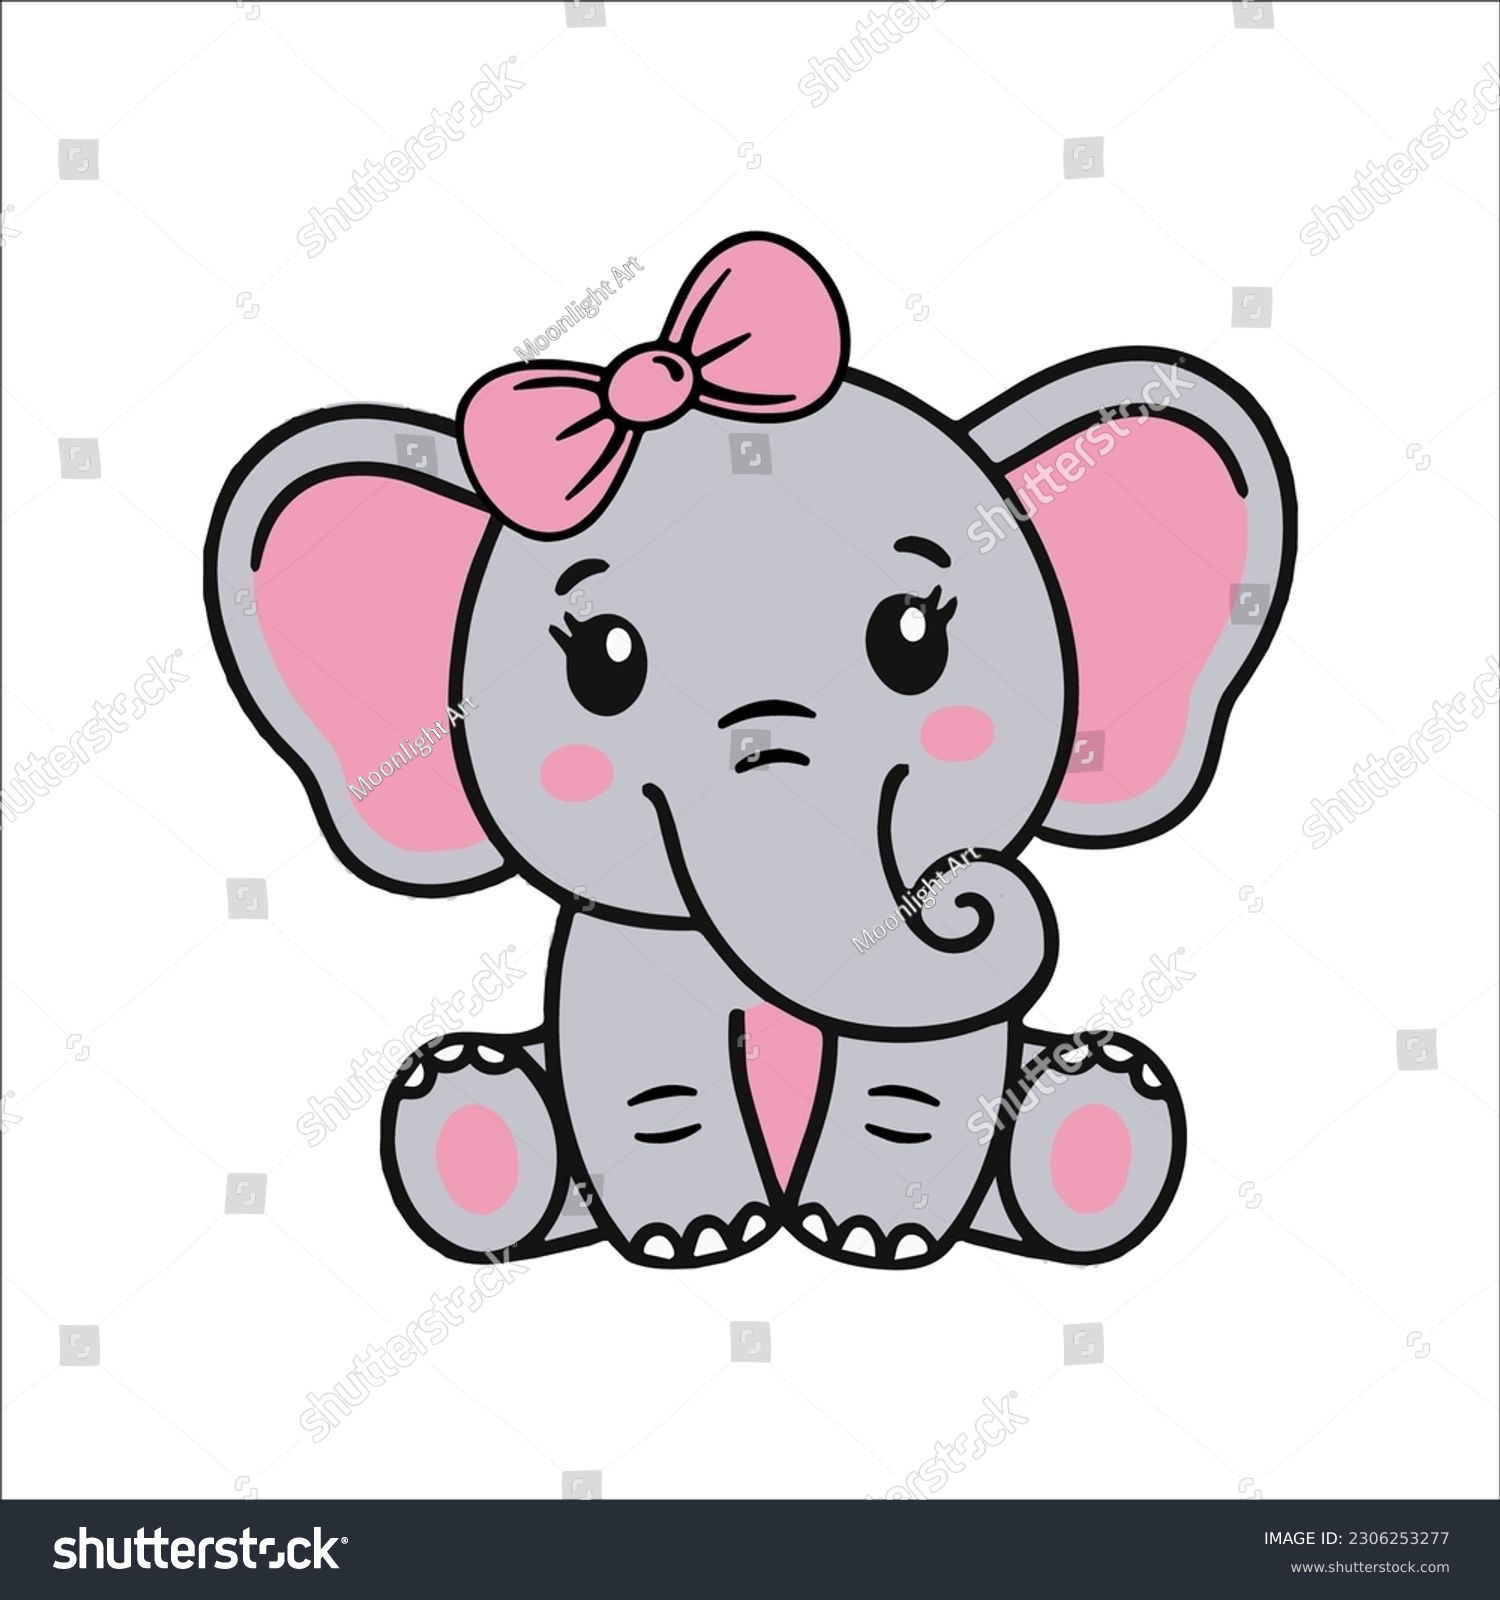 SVG of Cute baby elephant SVG, Baby elephant bow SVG, Baby elephant ribbon SVG, Cut file for Cricut and Silhouette Digital clipart, vector graphics, baby Girl svg